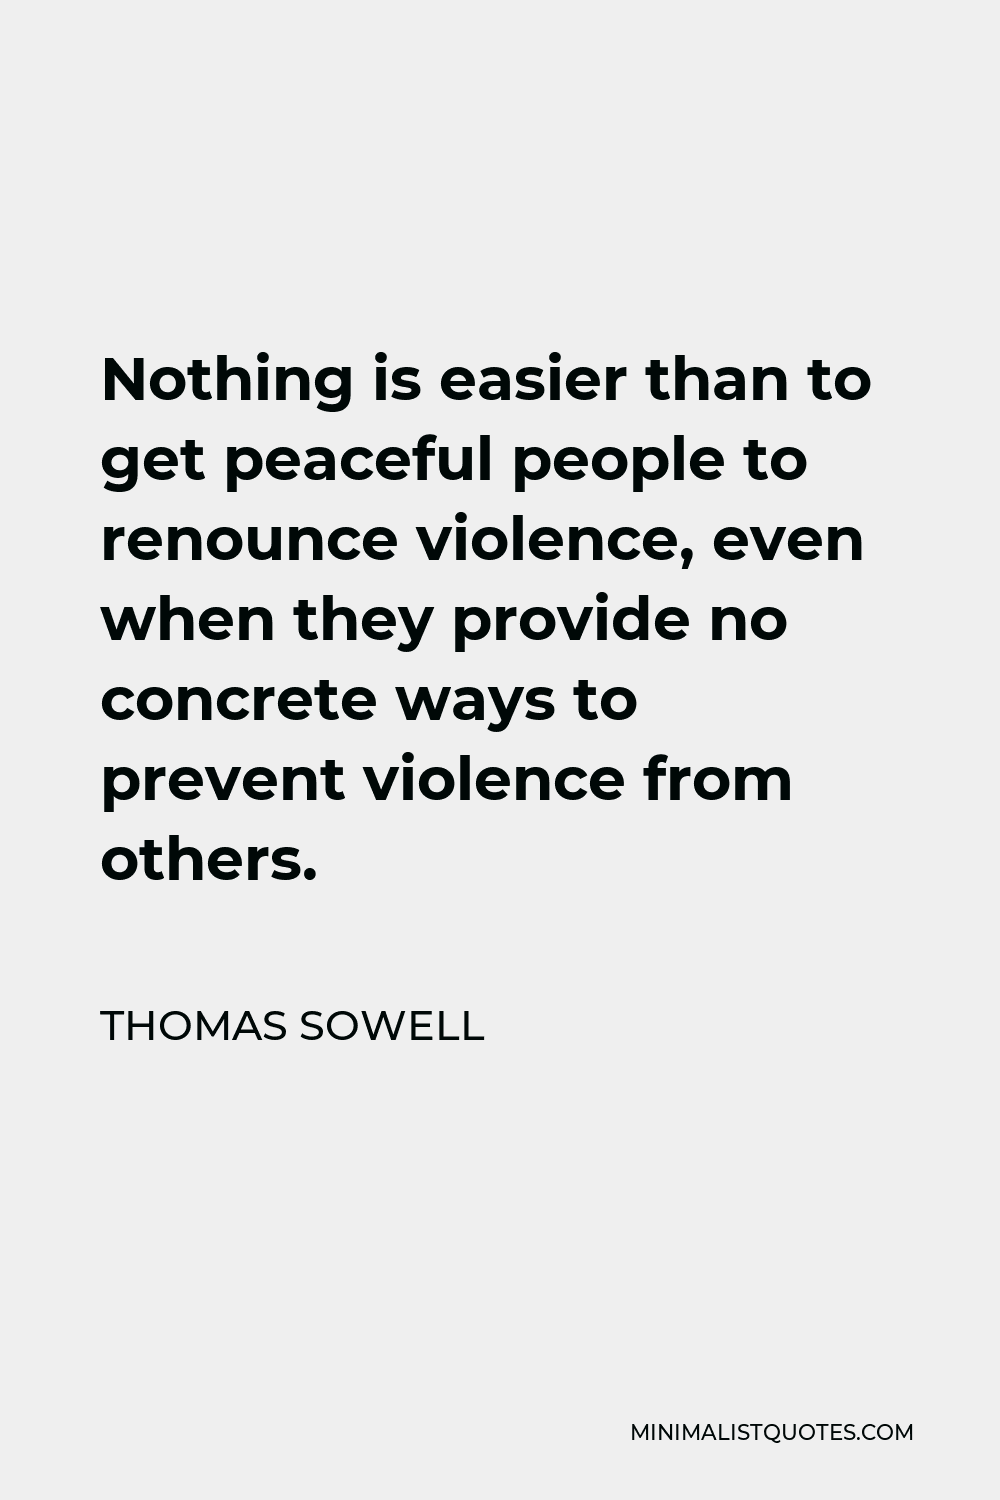 Thomas Sowell Quote - Nothing is easier than to get peaceful people to renounce violence, even when they provide no concrete ways to prevent violence from others.